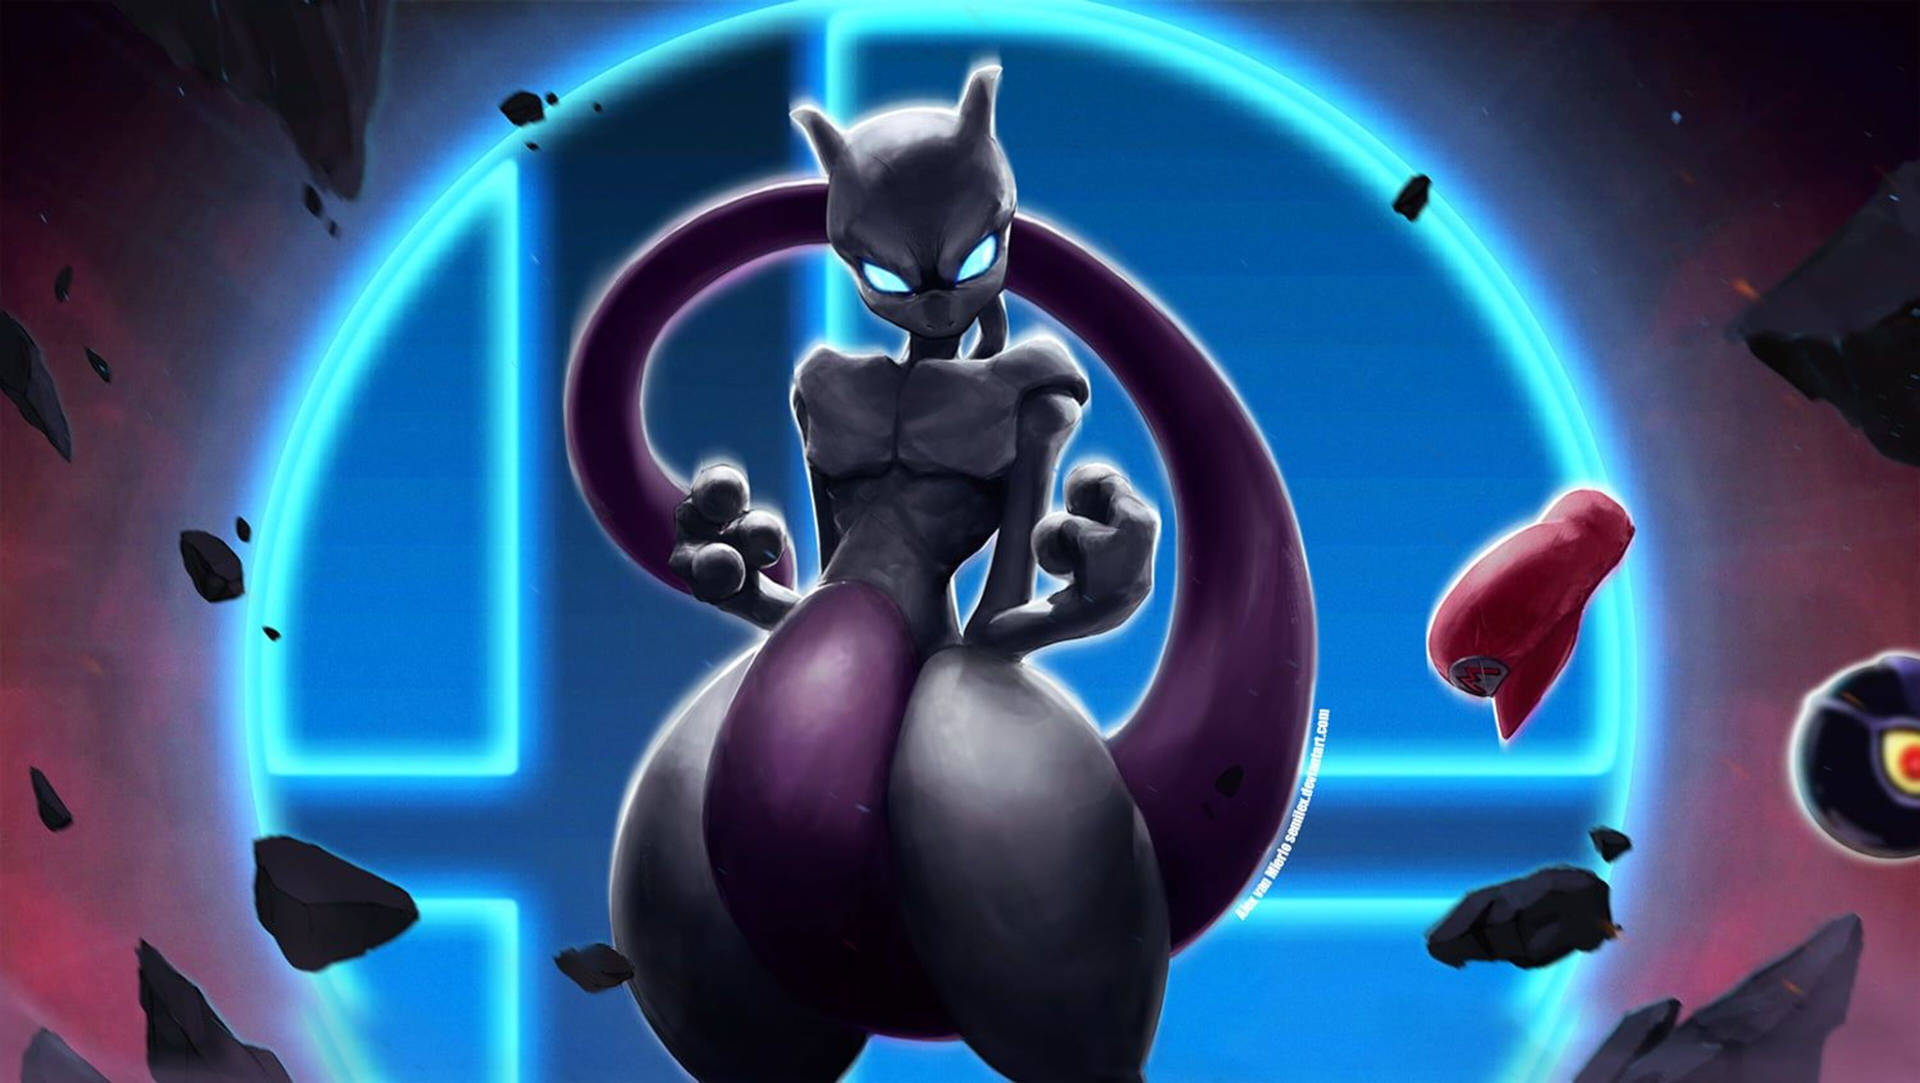 Cover your eyes, the mighty Mewtwo is here! Wallpaper